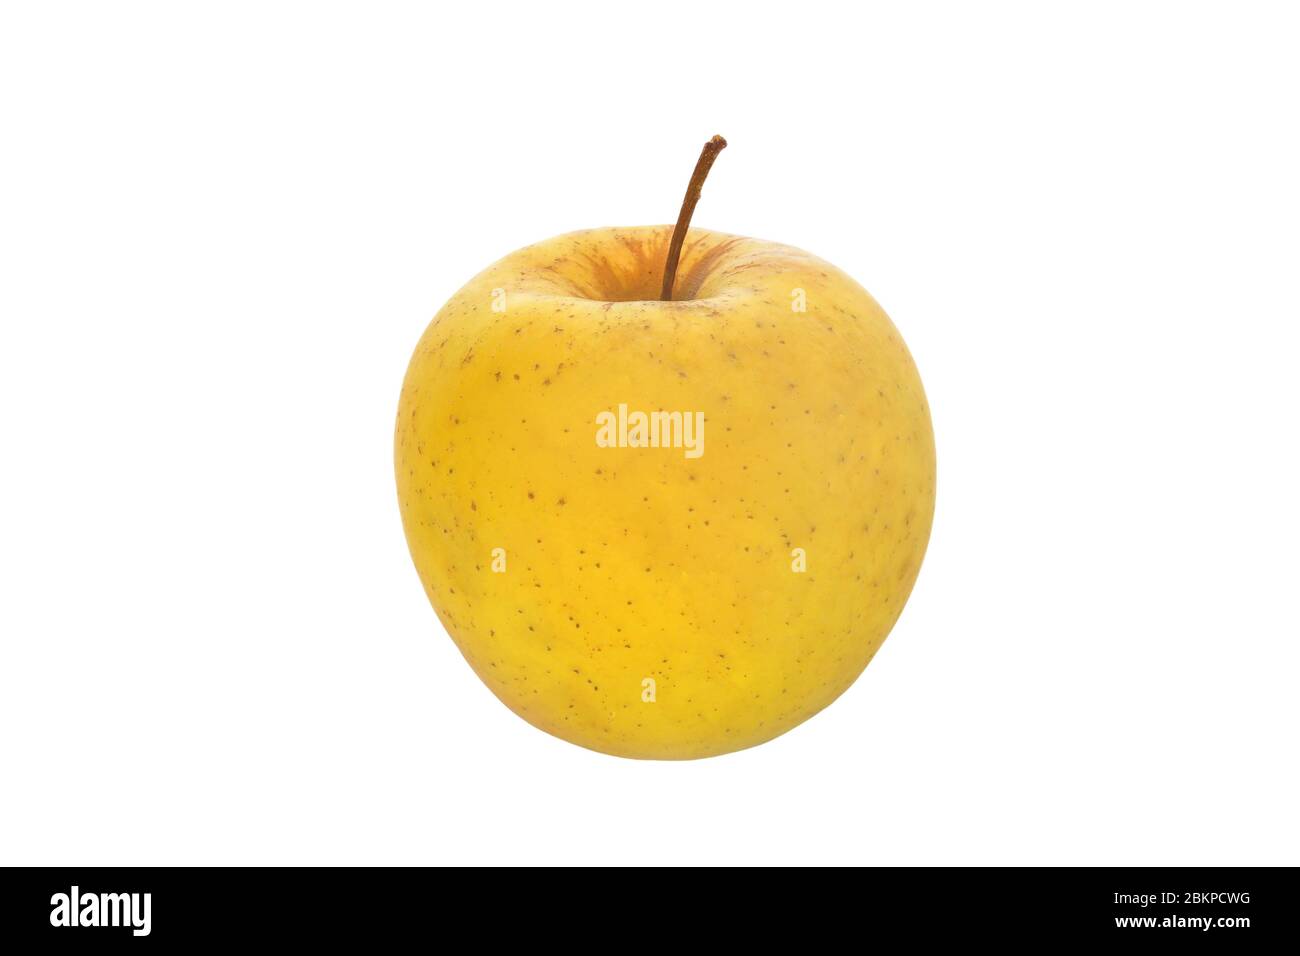 image of fruit one yellow apple on a white background Stock Photo